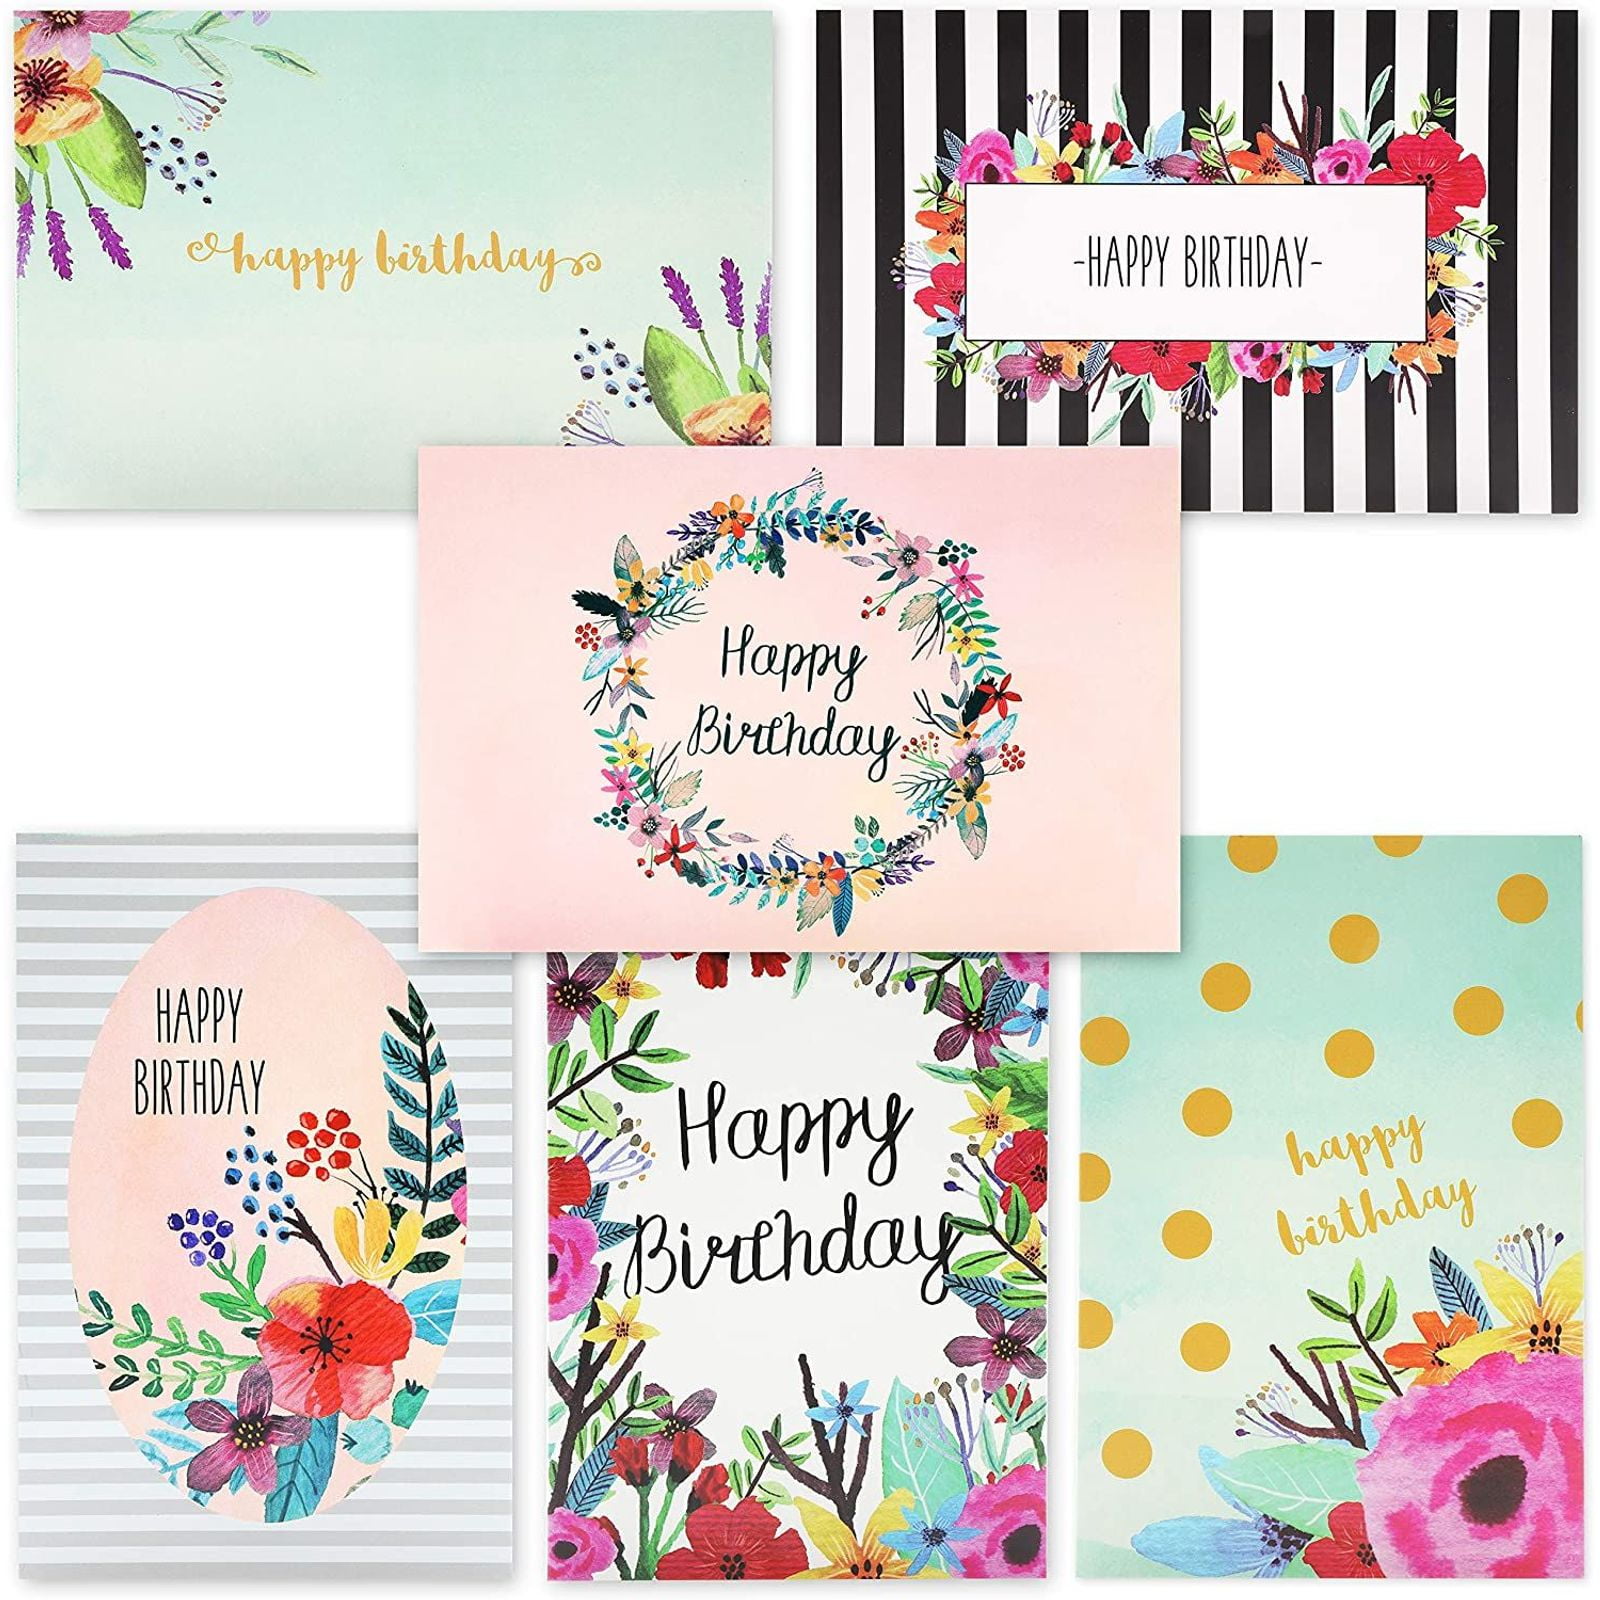 Beautiful Flowers Pop Up Card Get Well Cards Greeting Cards Congratulations Cards Birthday Cards Mum Wife Sister Birthday Cards